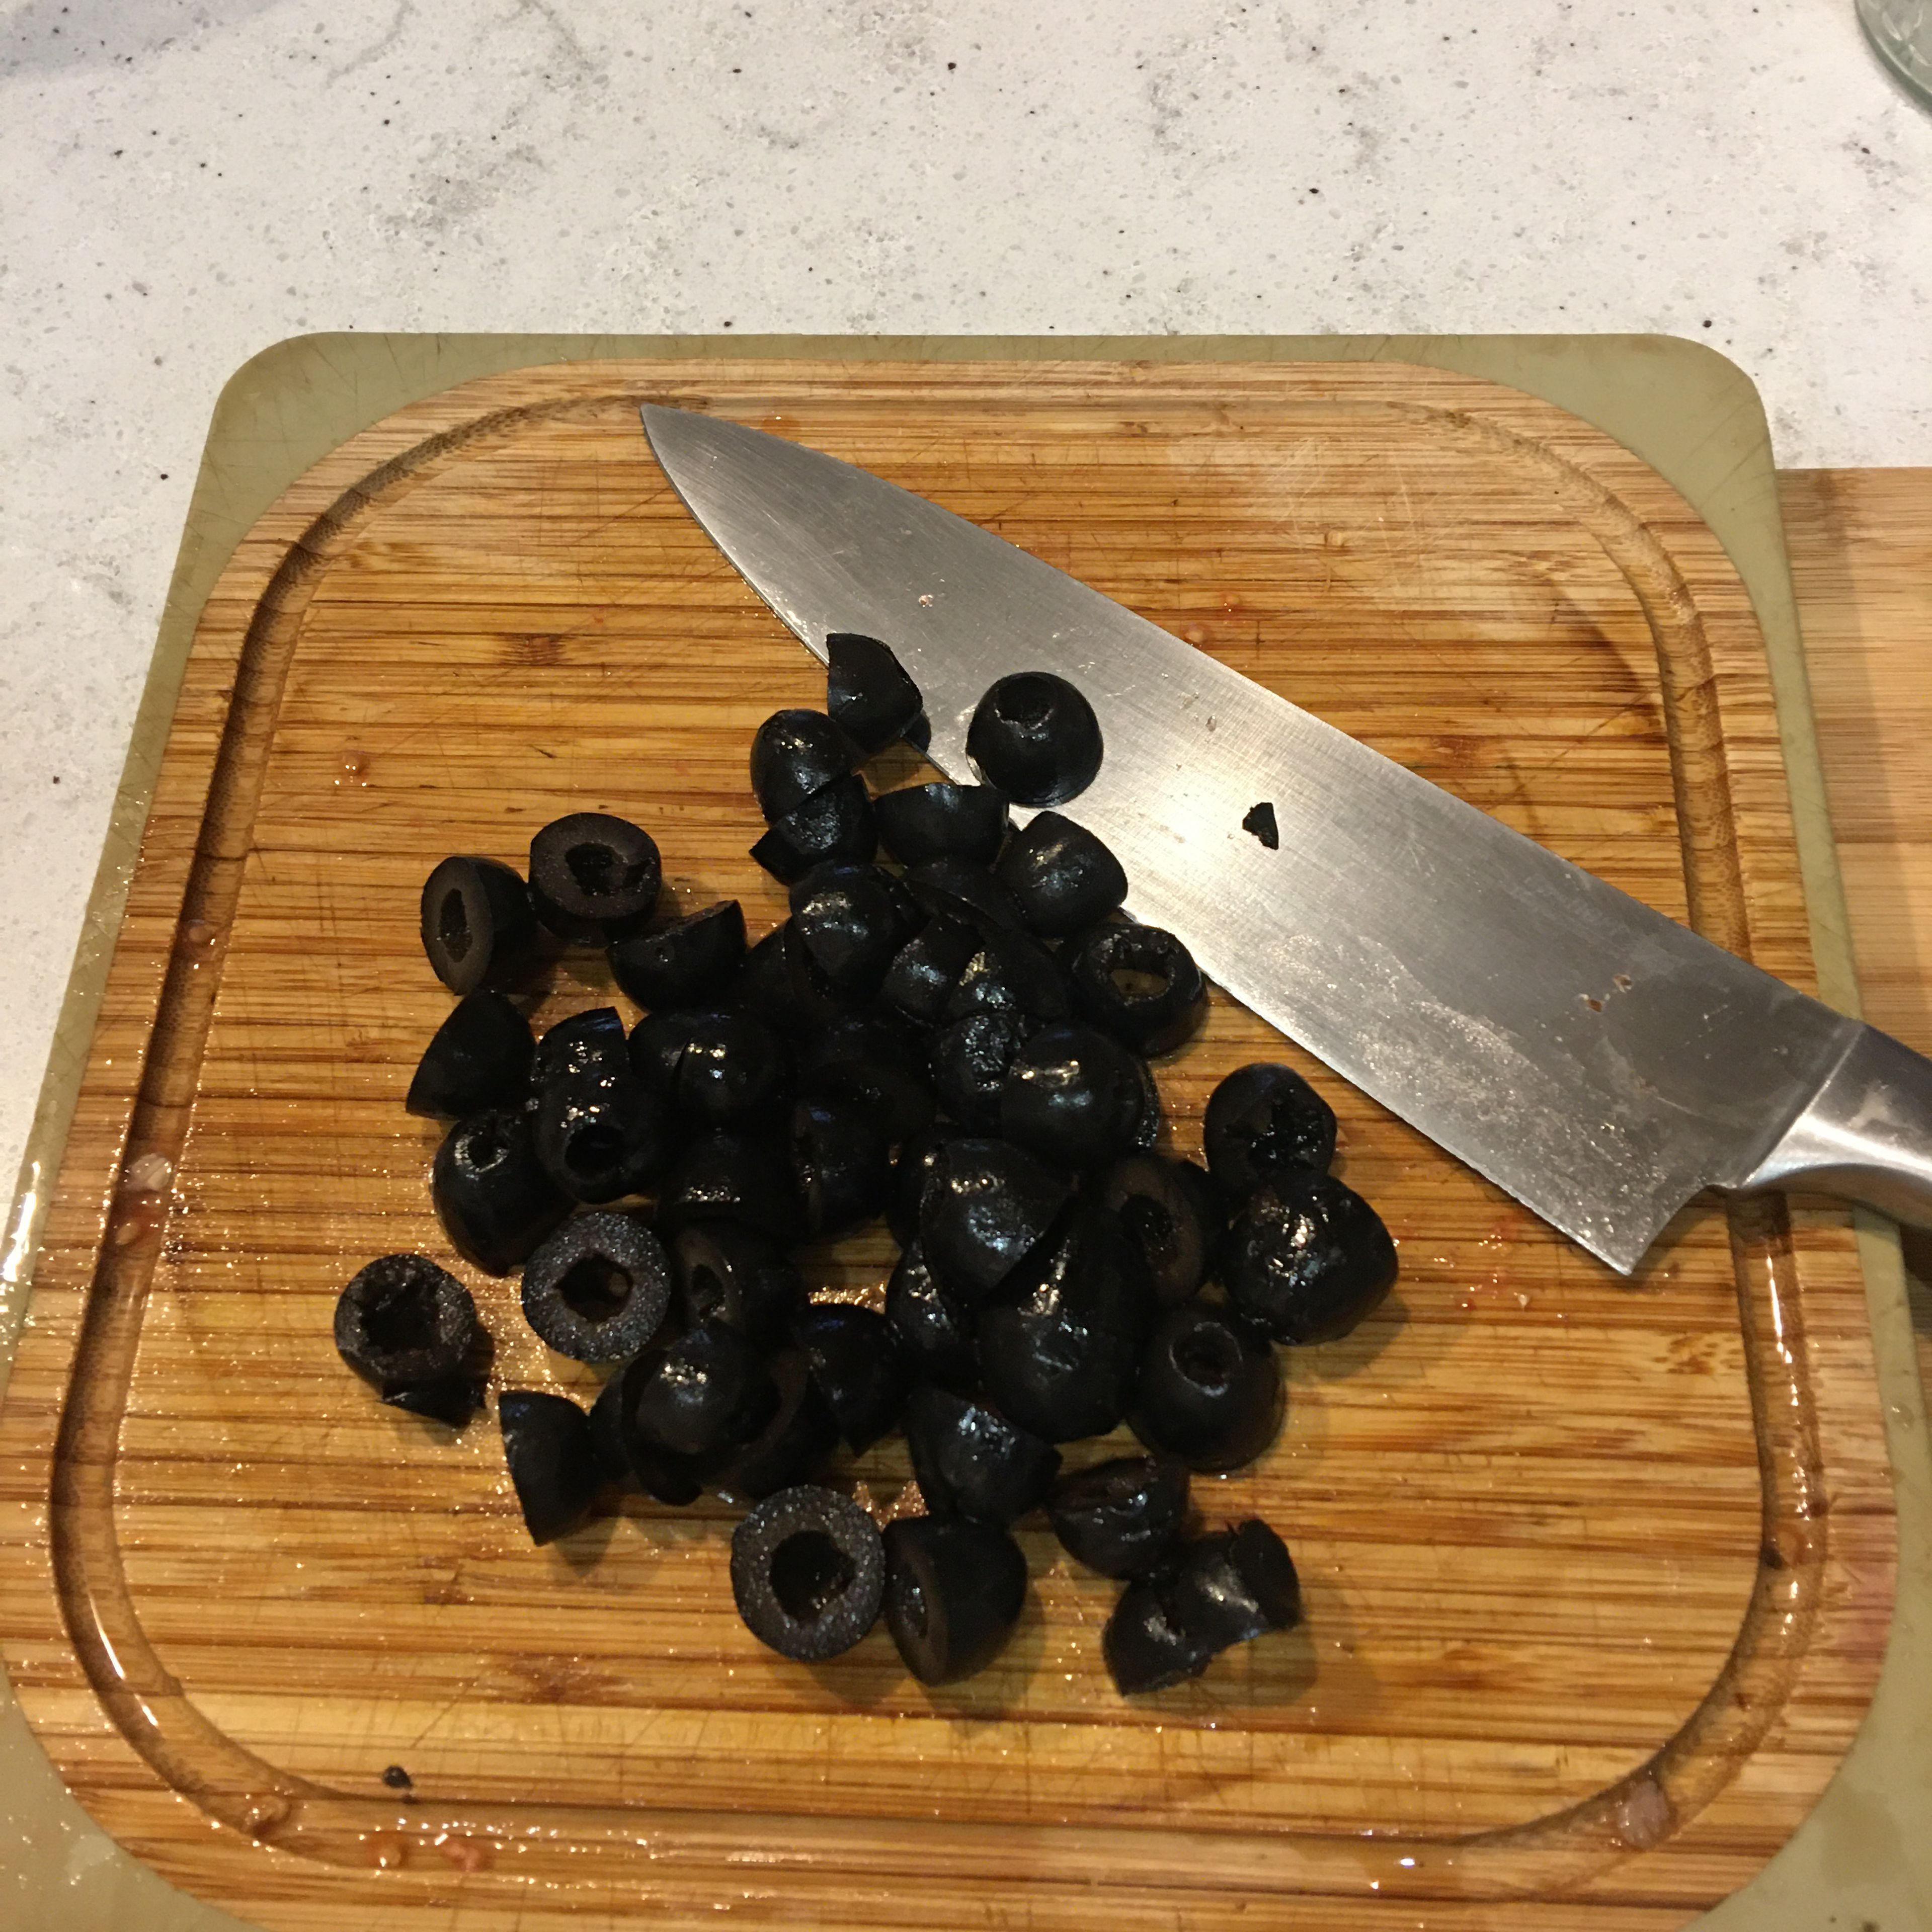 Pit you olives (if they are not pitted) the cut them in half.